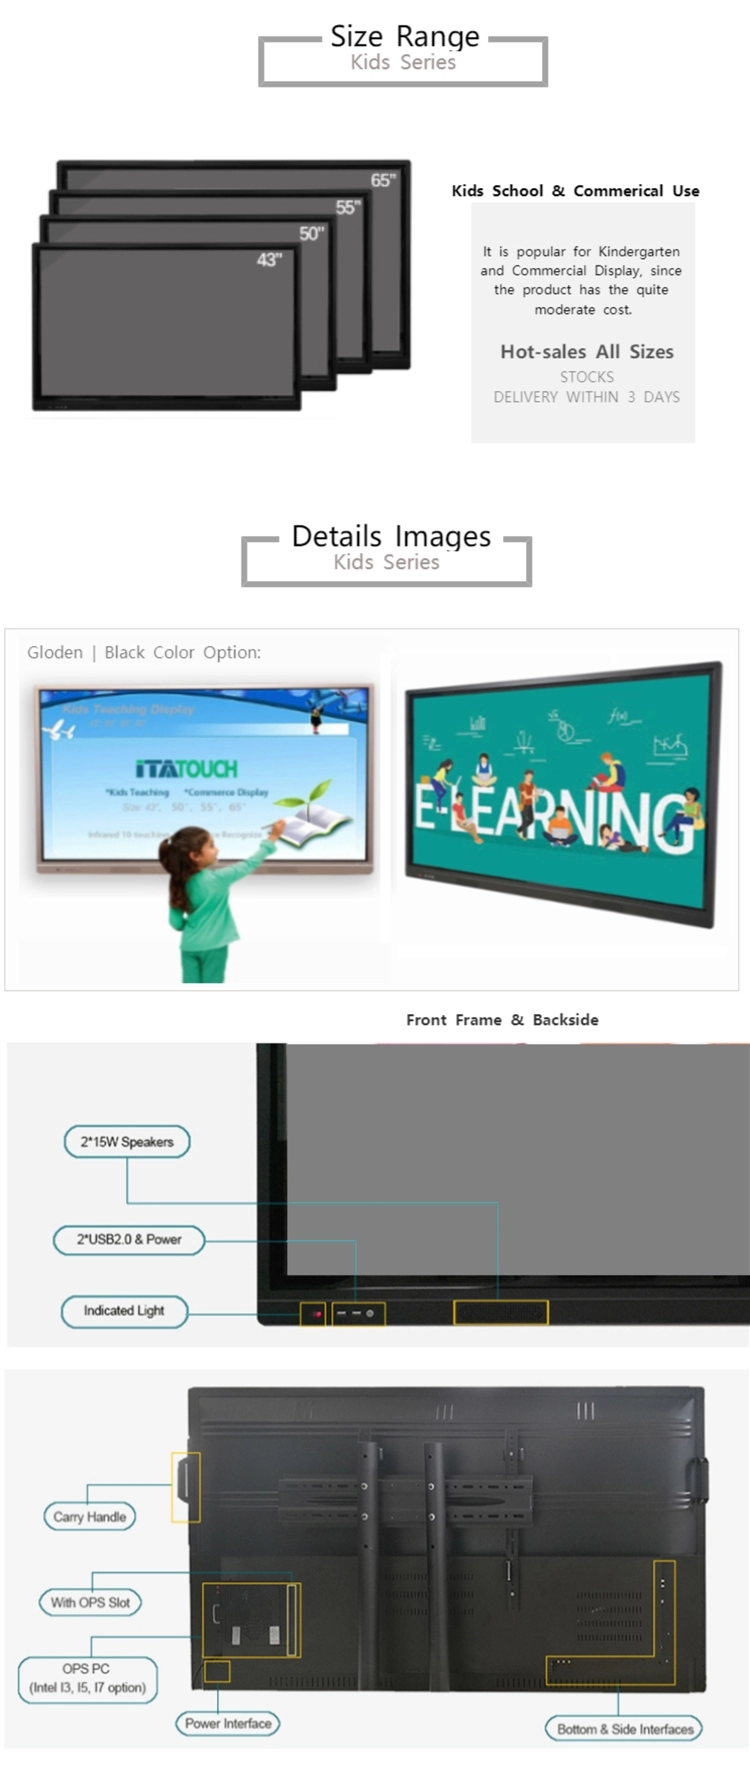 2020 Top 10 Interactive Display Cheap Price Flat Smart screen touch Board TV for Kids School